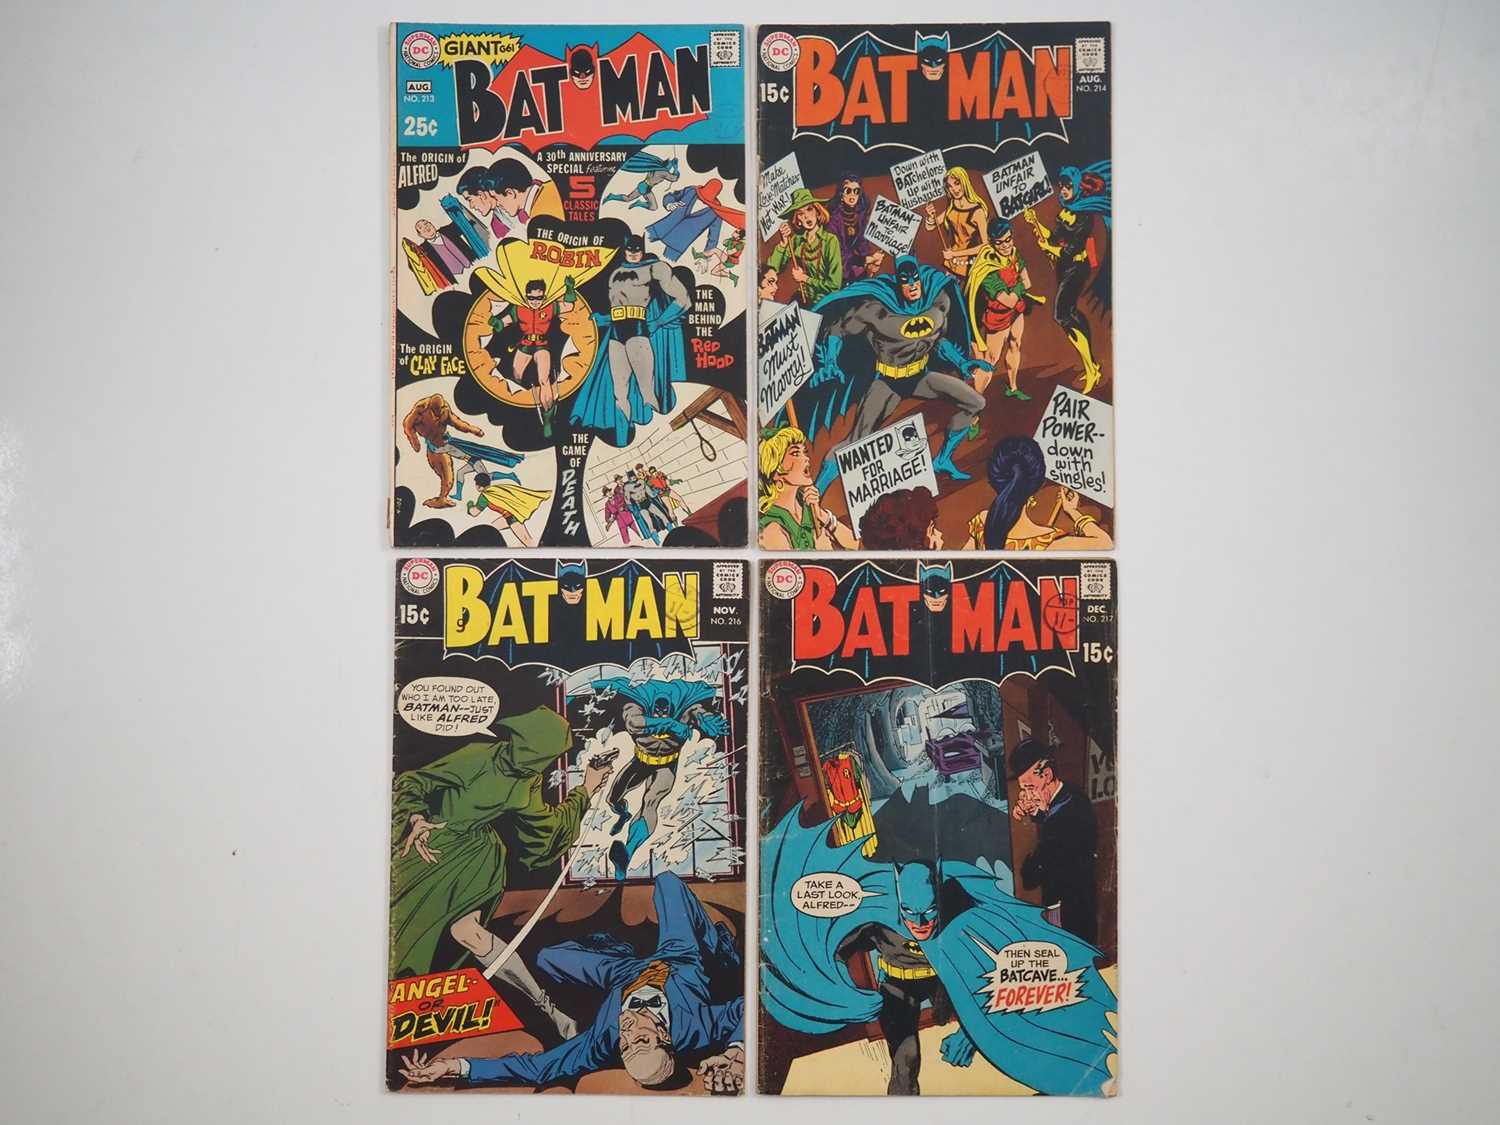 BATMAN #213, 214, 216, 217 (4 in Lot) - (1969 - DC) - Includes the 30th anniversary issue + the